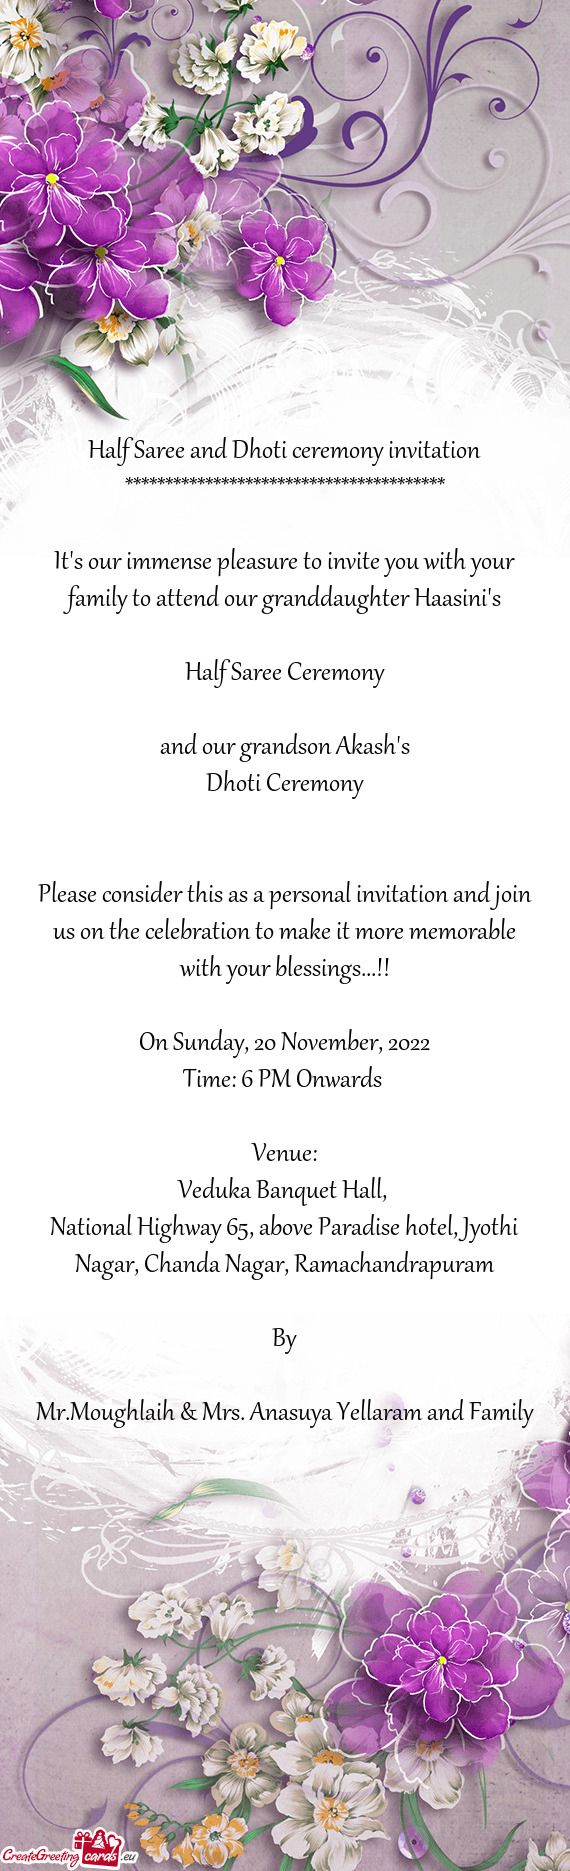 It's our immense pleasure to invite you with your family to attend our granddaughter Haasini's